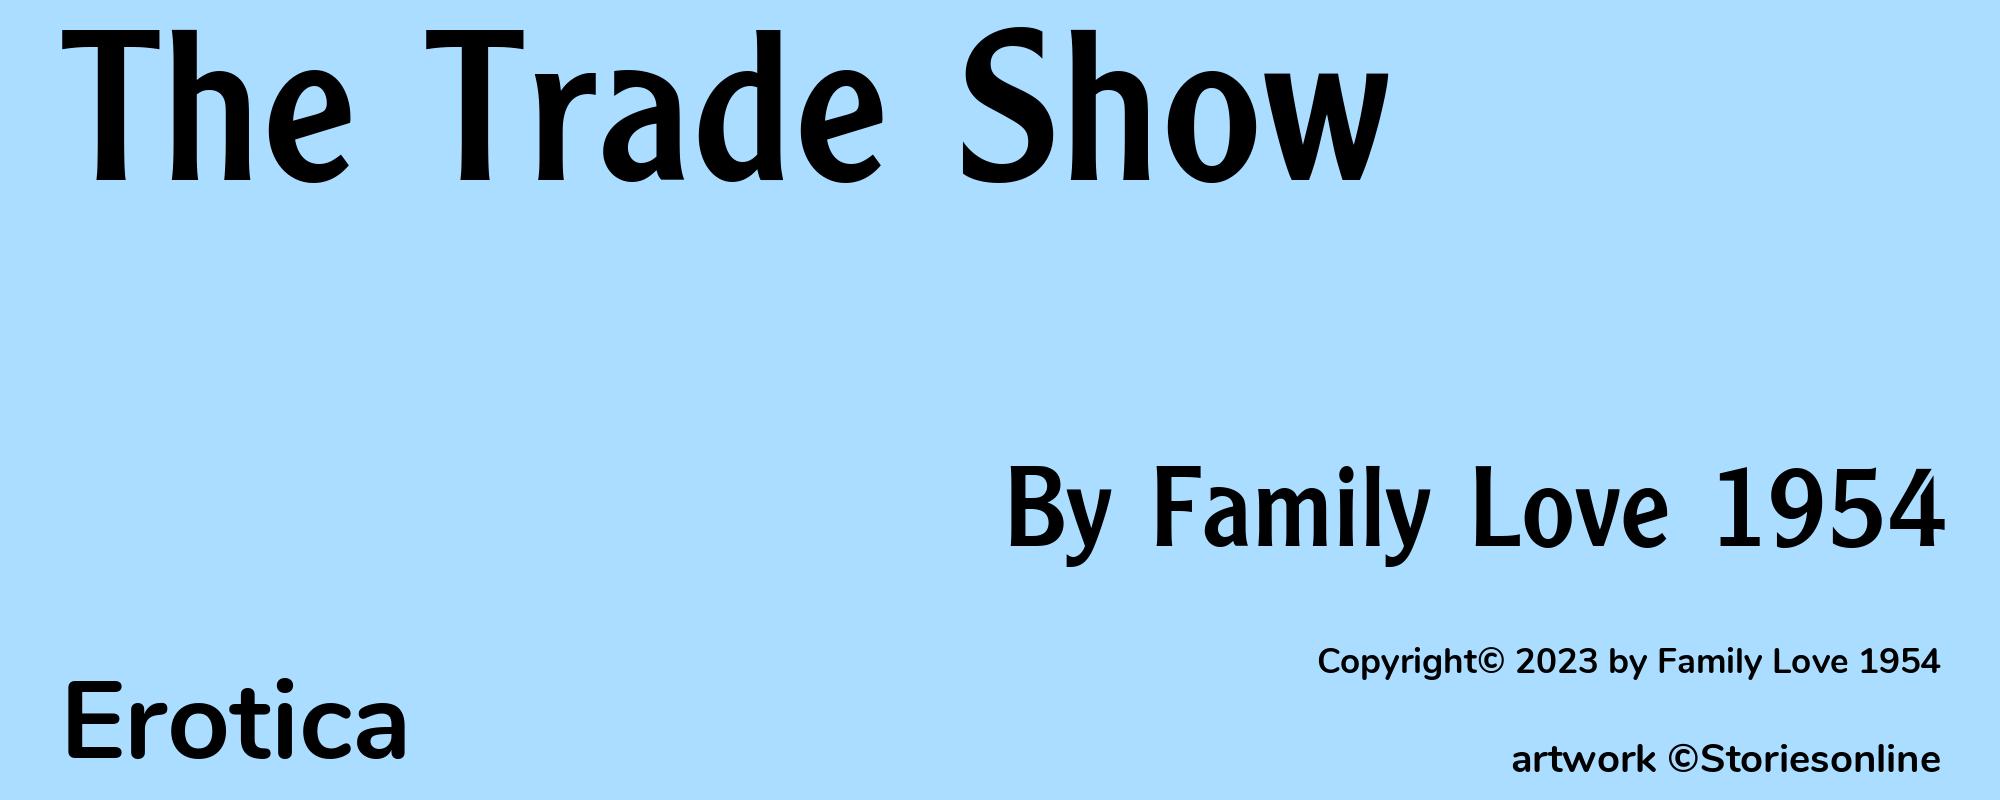 The Trade Show - Cover